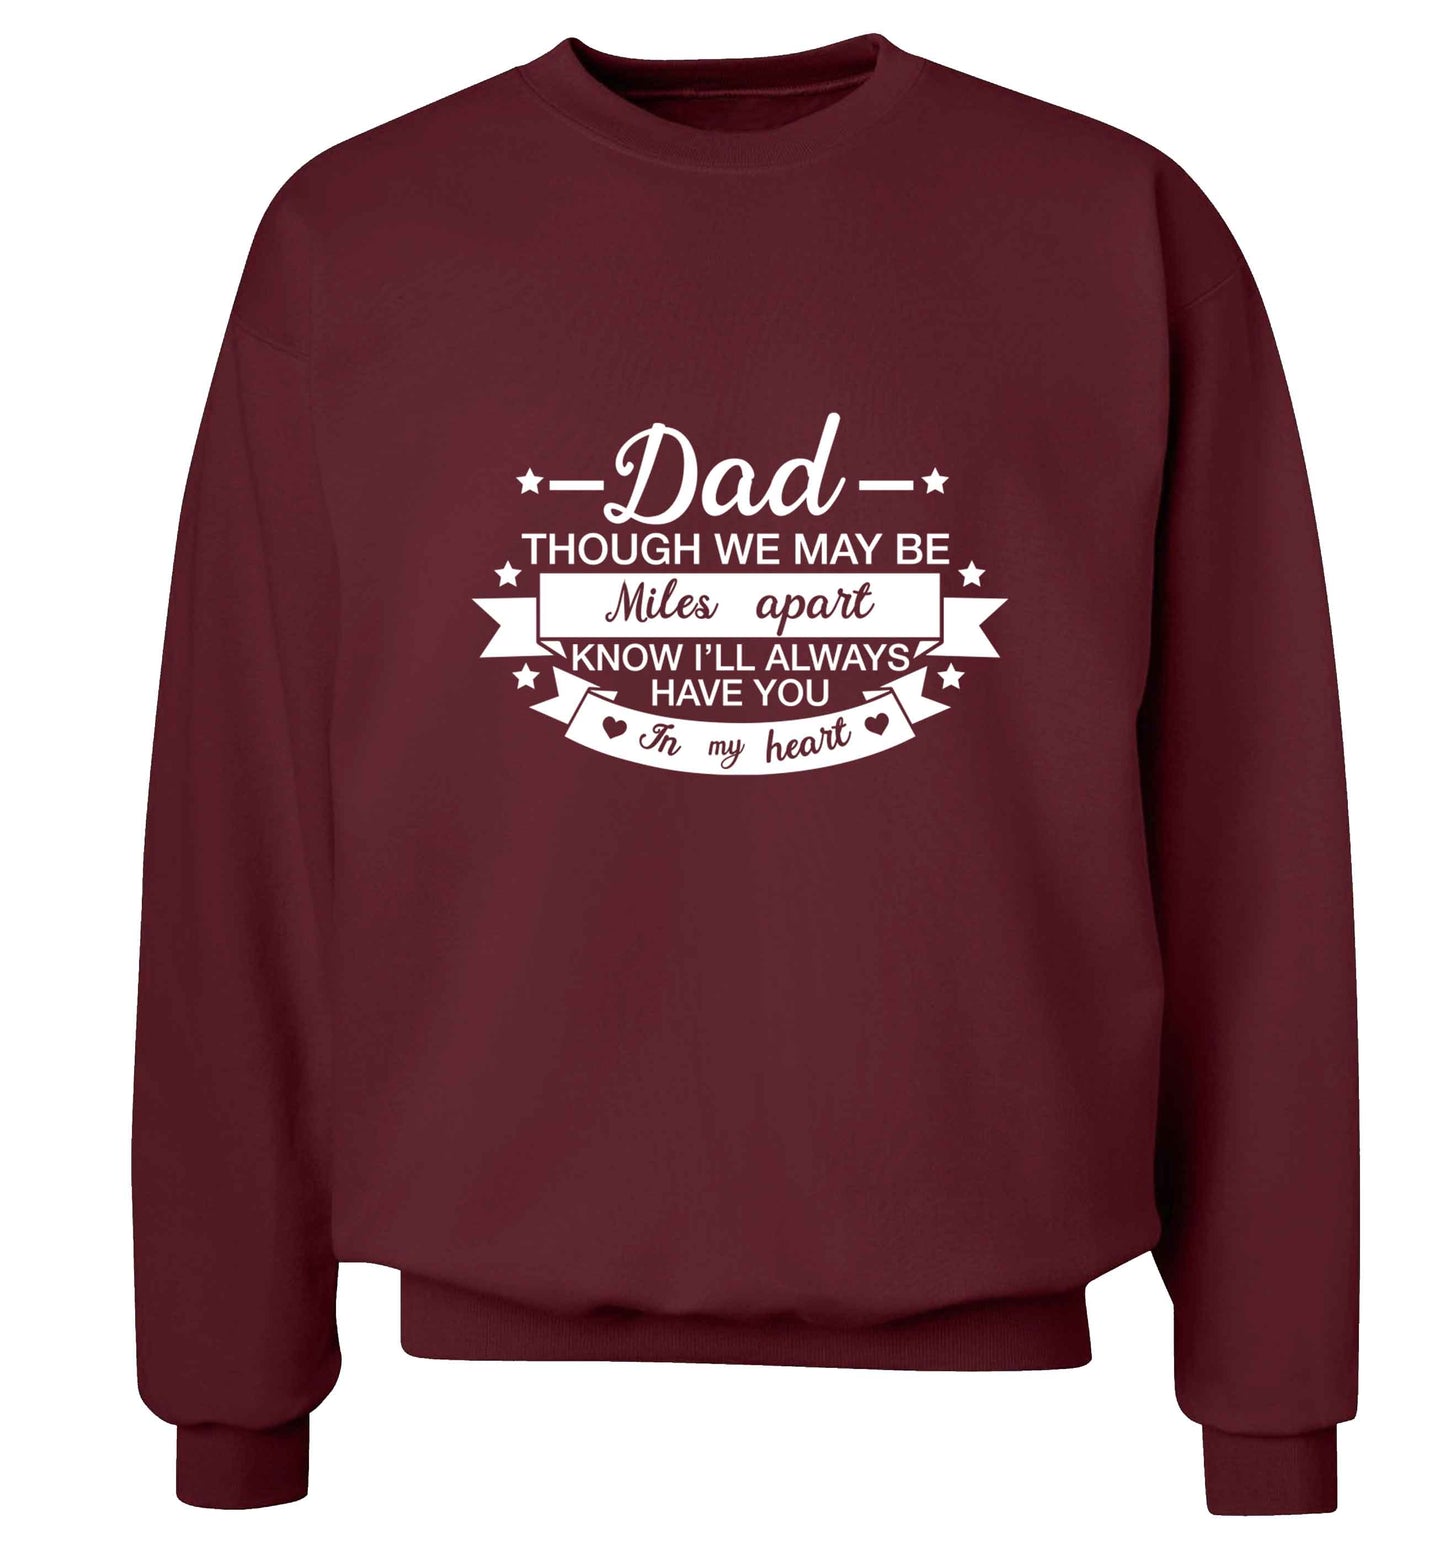 Dad though we are miles apart know I'll always have you in my heart adult's unisex maroon sweater 2XL